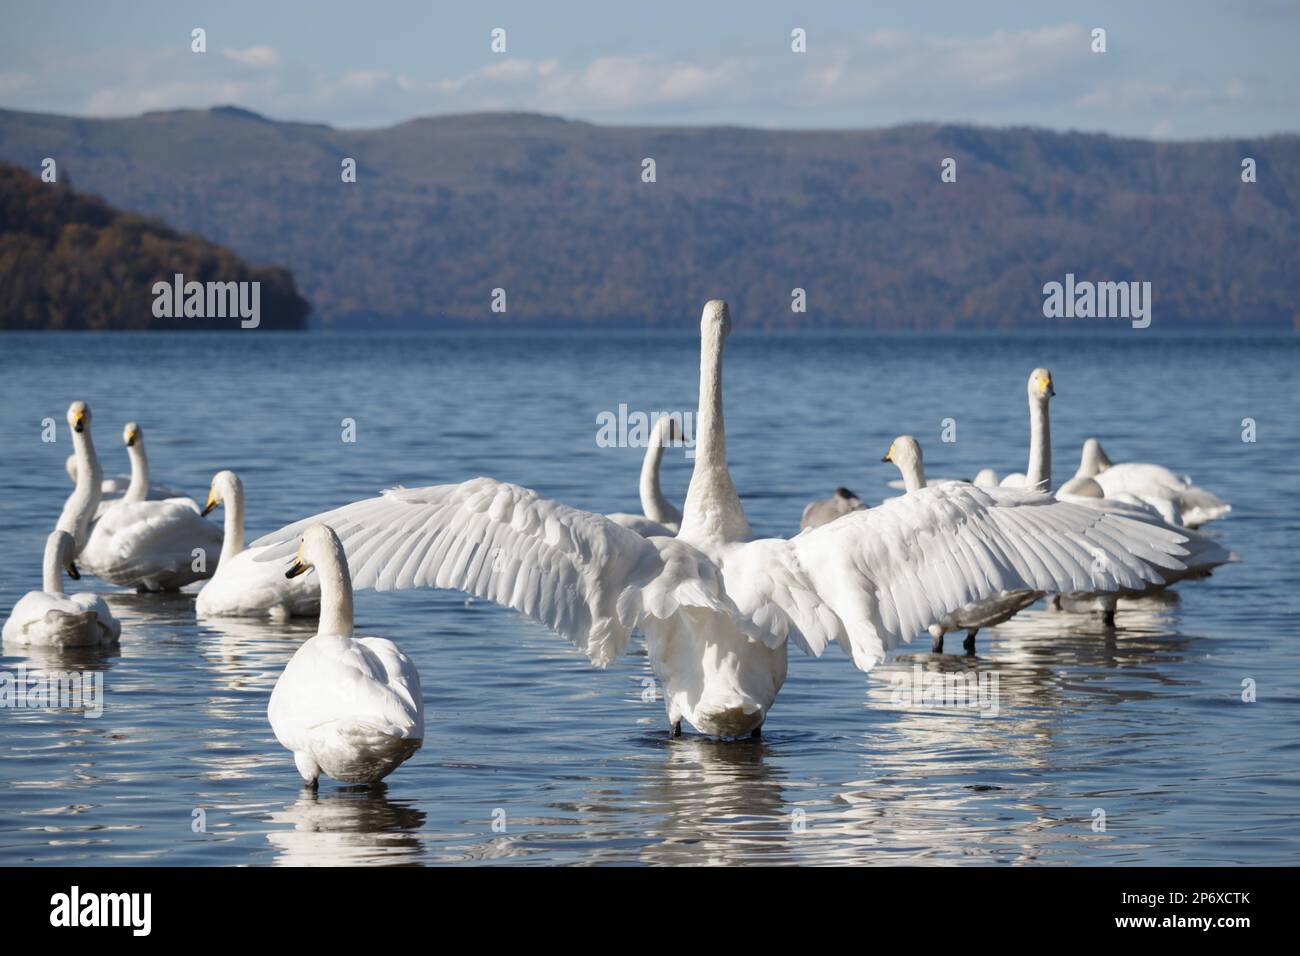 Wingspan of whooper swan on a lake Stock Photo